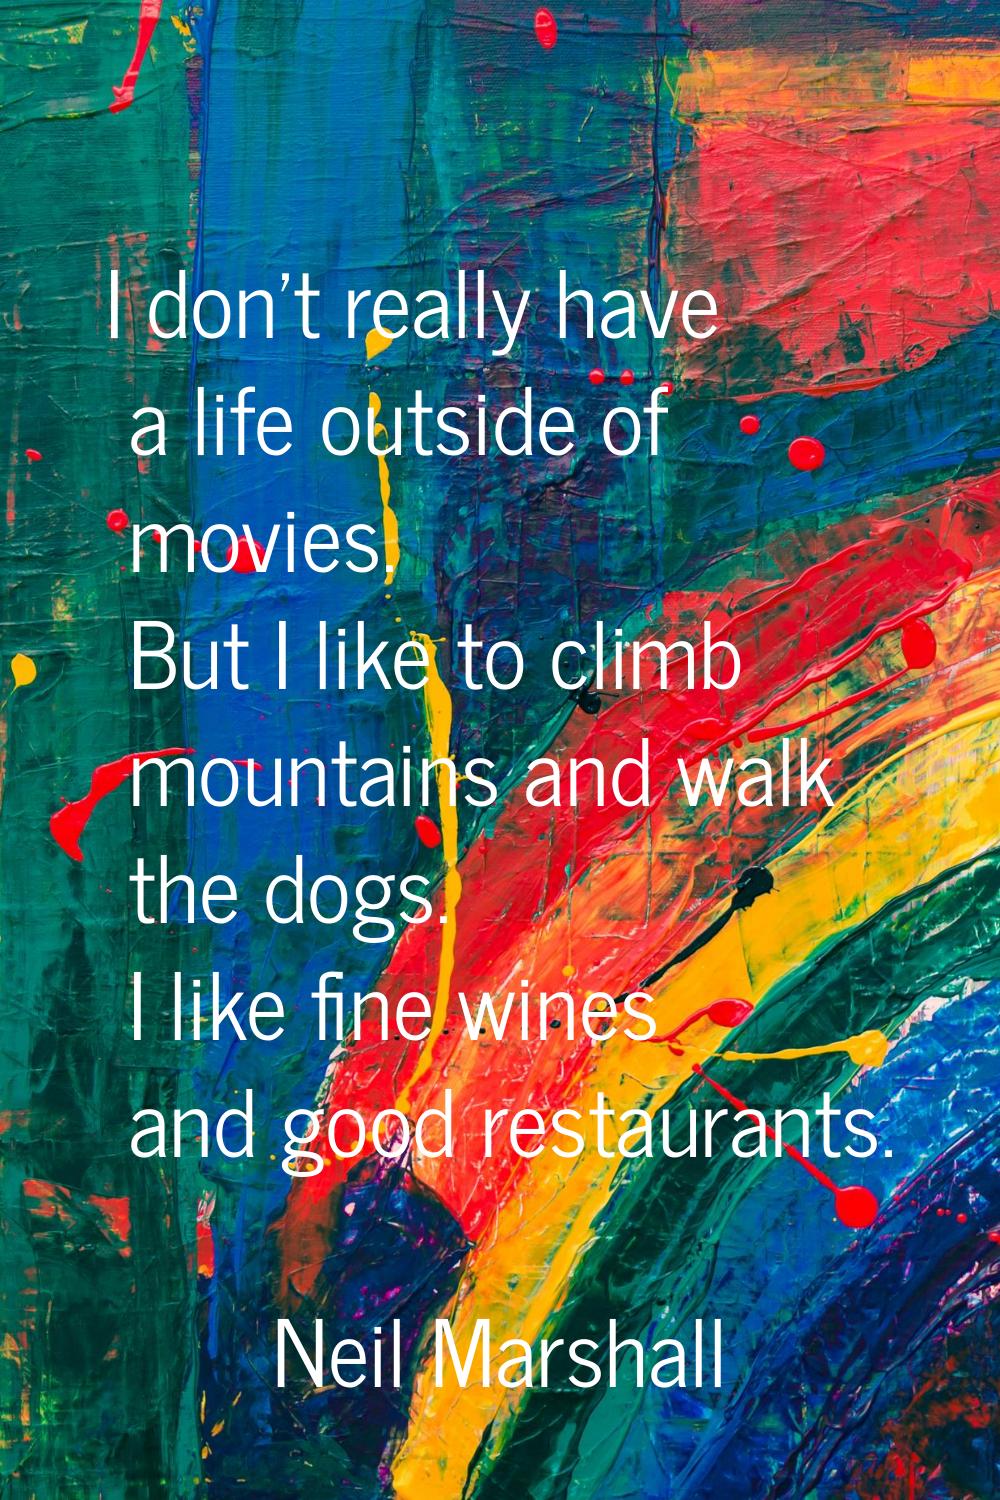 I don't really have a life outside of movies. But I like to climb mountains and walk the dogs. I li